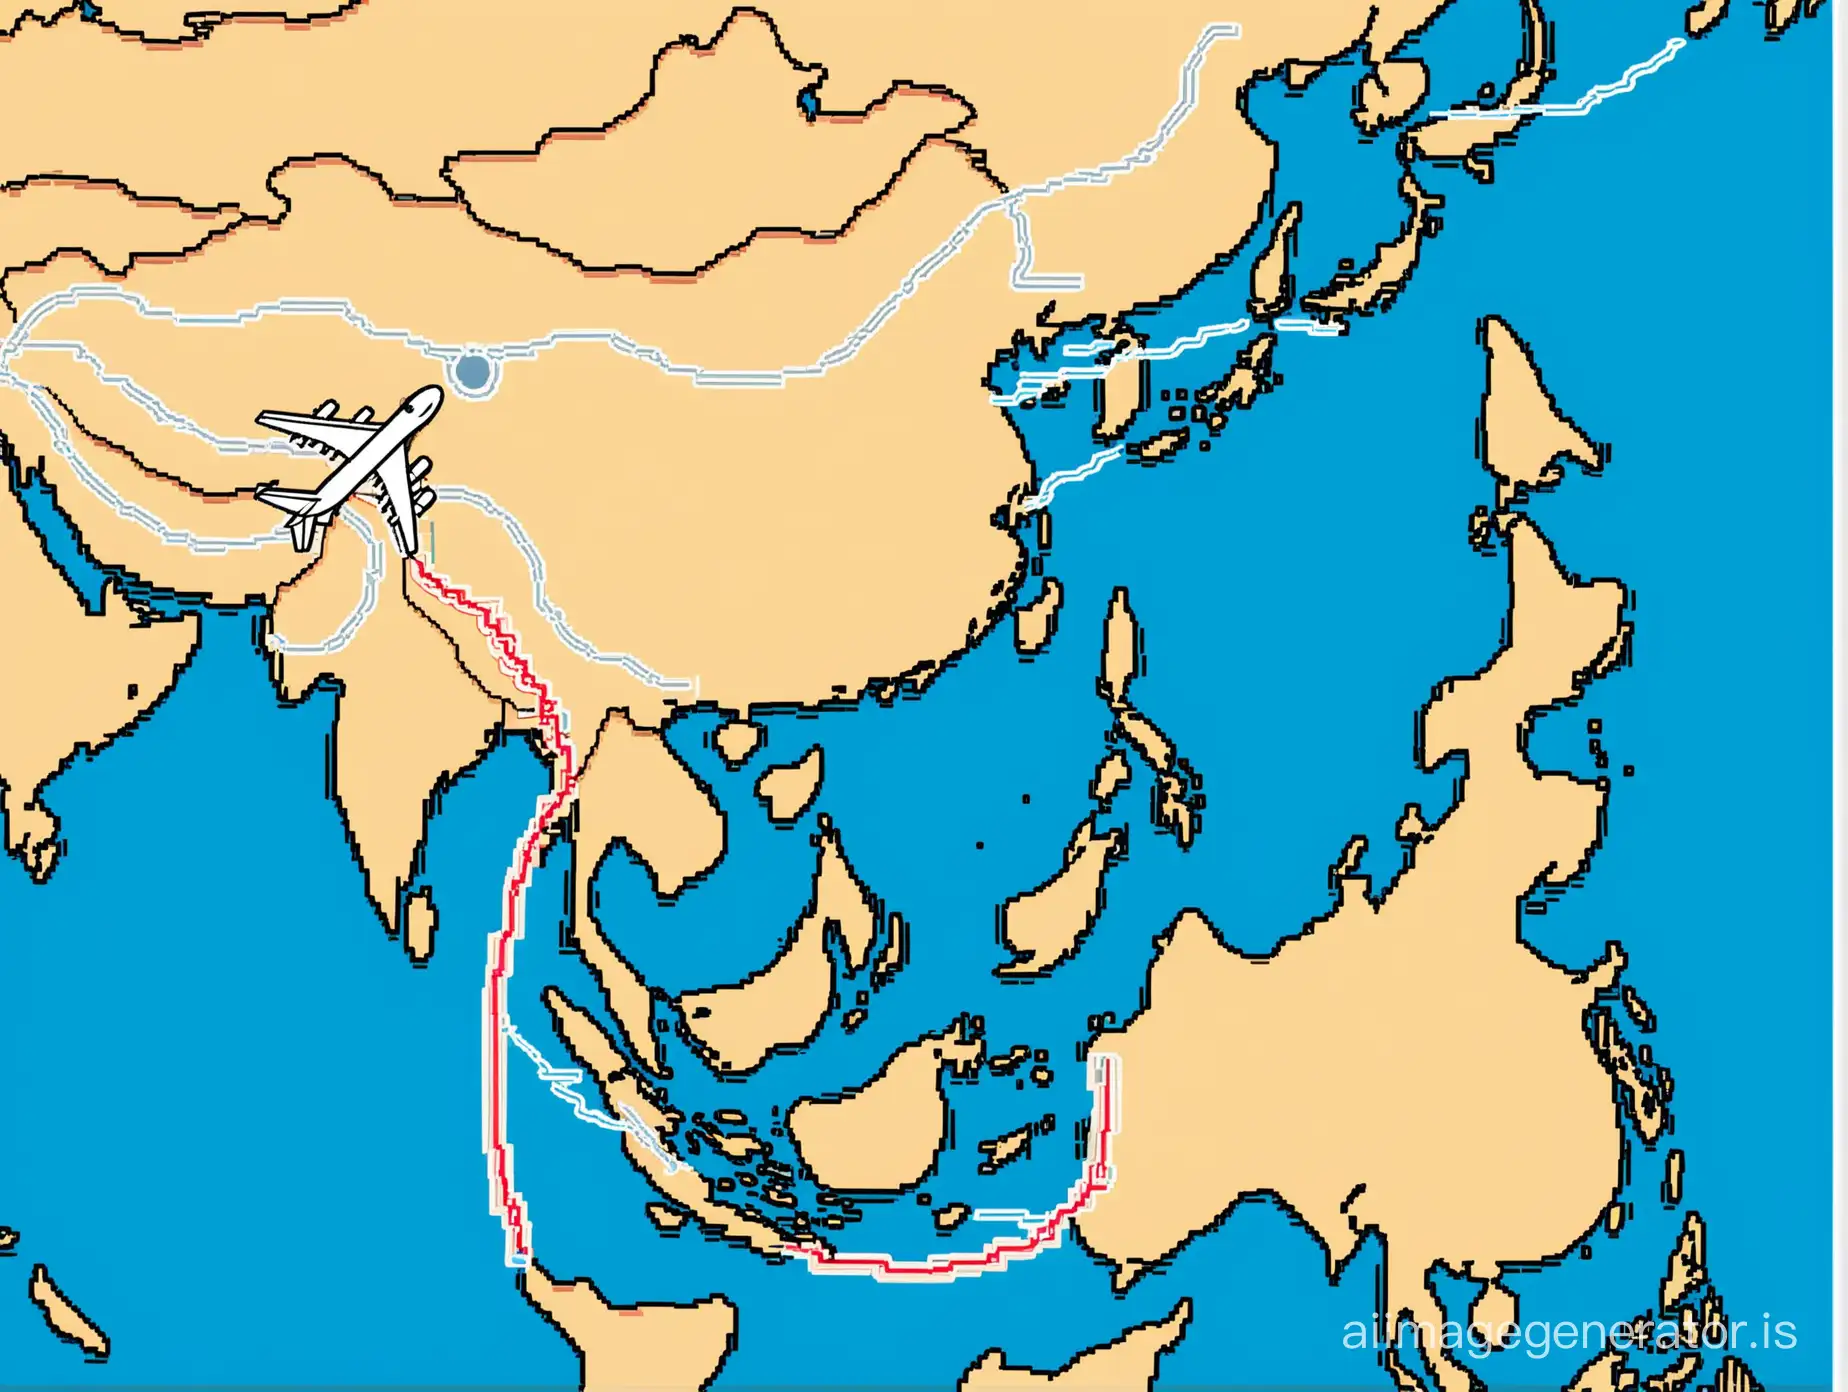 map showing the flight's route from Beijing to South China Sea with an airplane icon following the route.